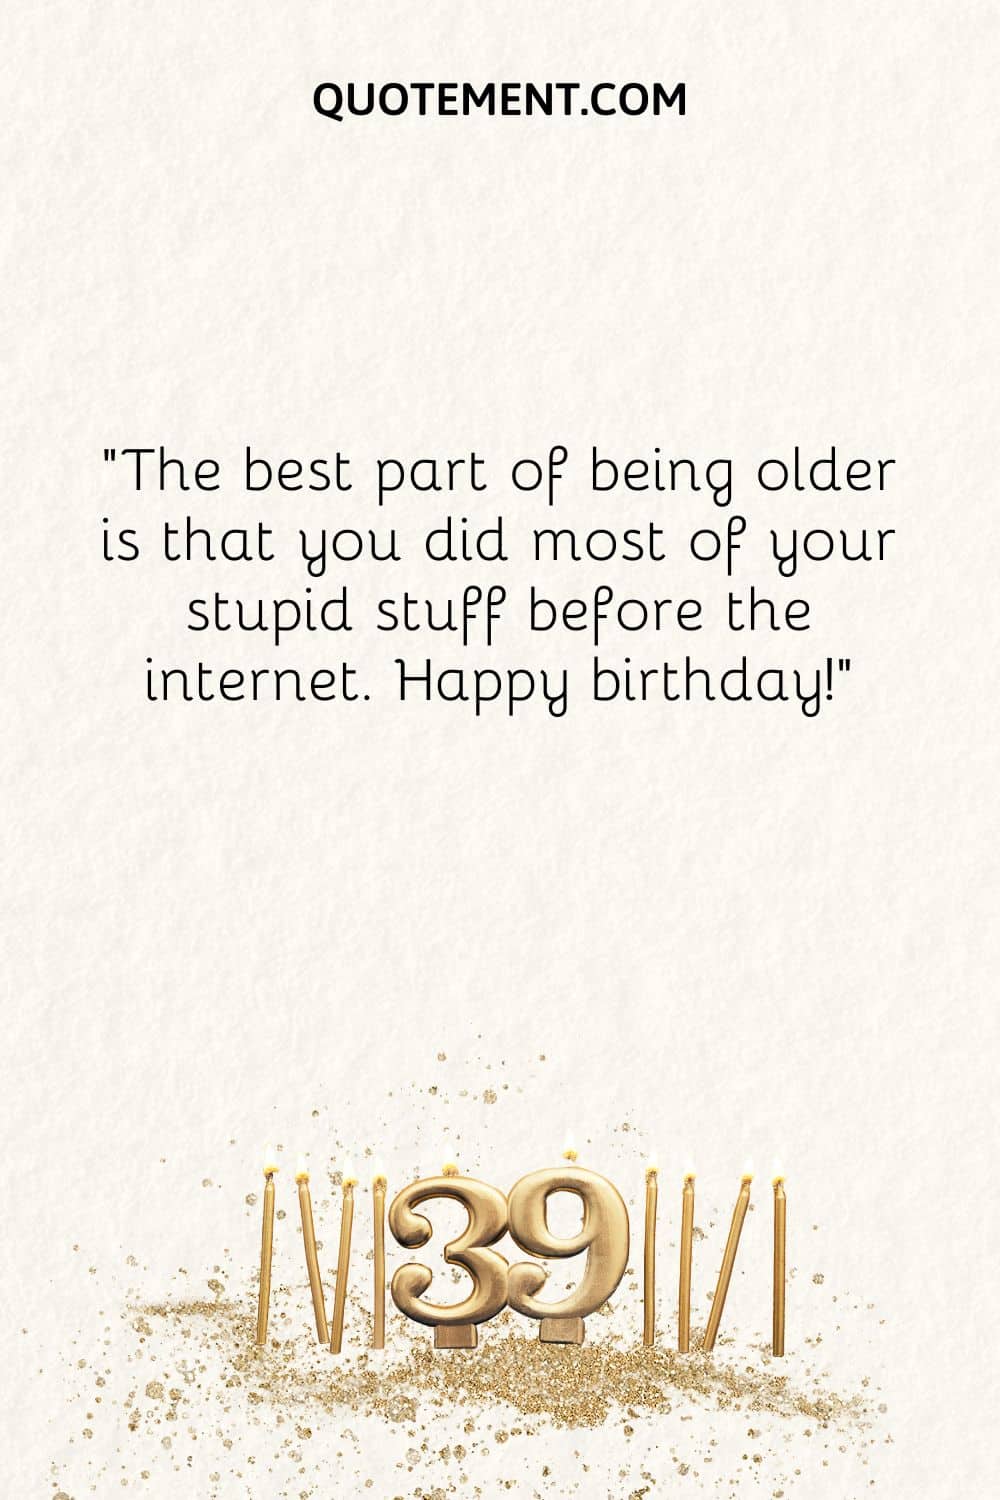 The best part of being older is that you did most of your stupid stuff before the internet